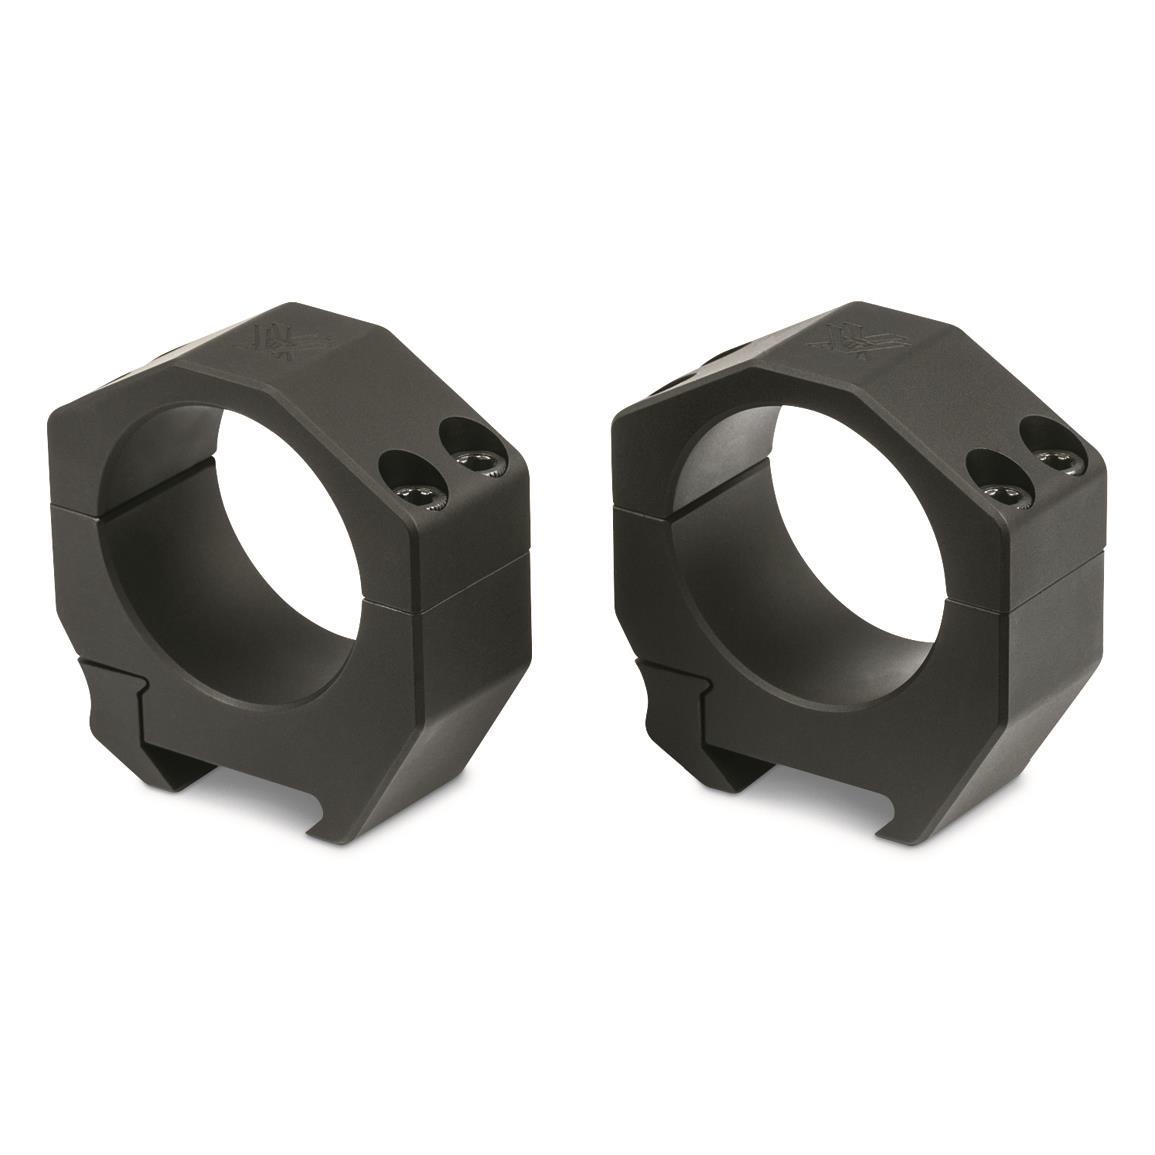 Vortex Precision Matched 34mm Scope Rings, 1.1" Height